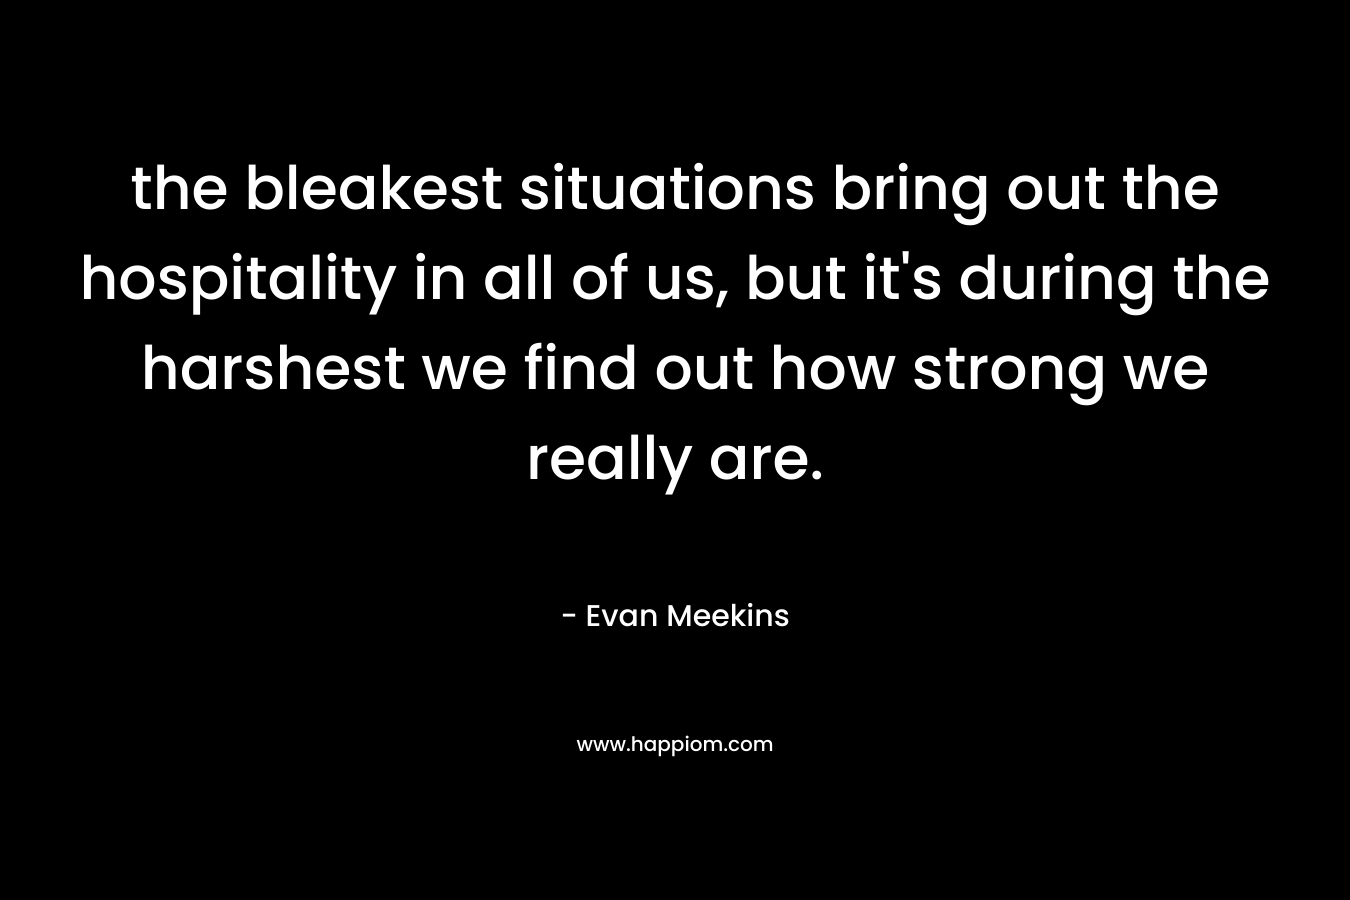 the bleakest situations bring out the hospitality in all of us, but it’s during the harshest we find out how strong we really are. – Evan Meekins